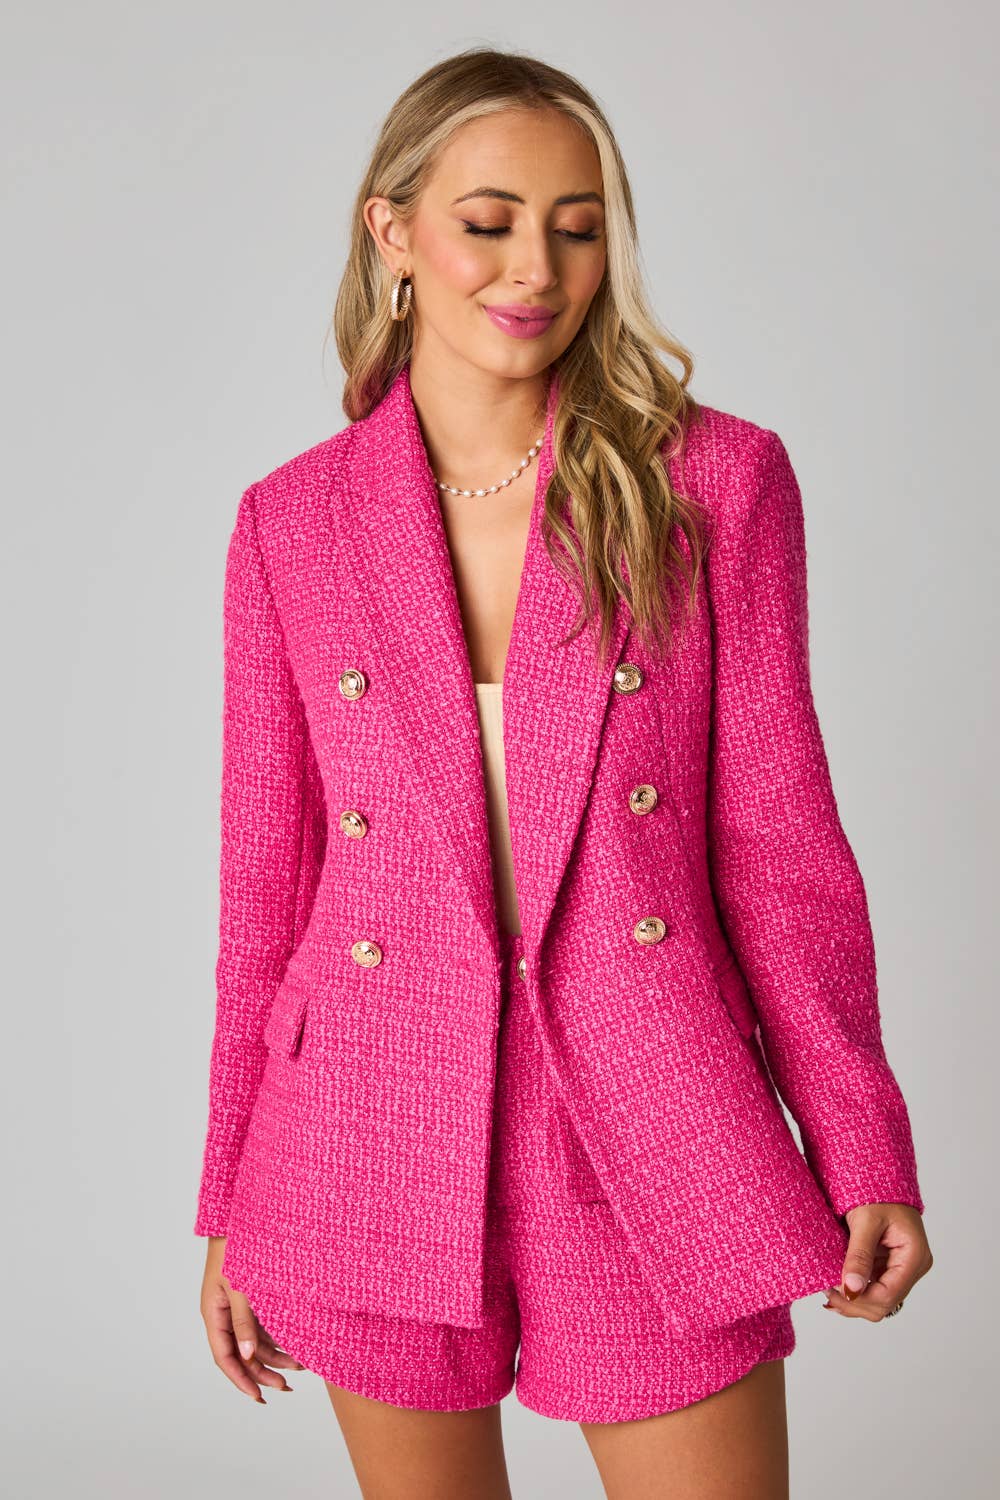 White Tweed Blazer with Gold Buttons | SilkFred US